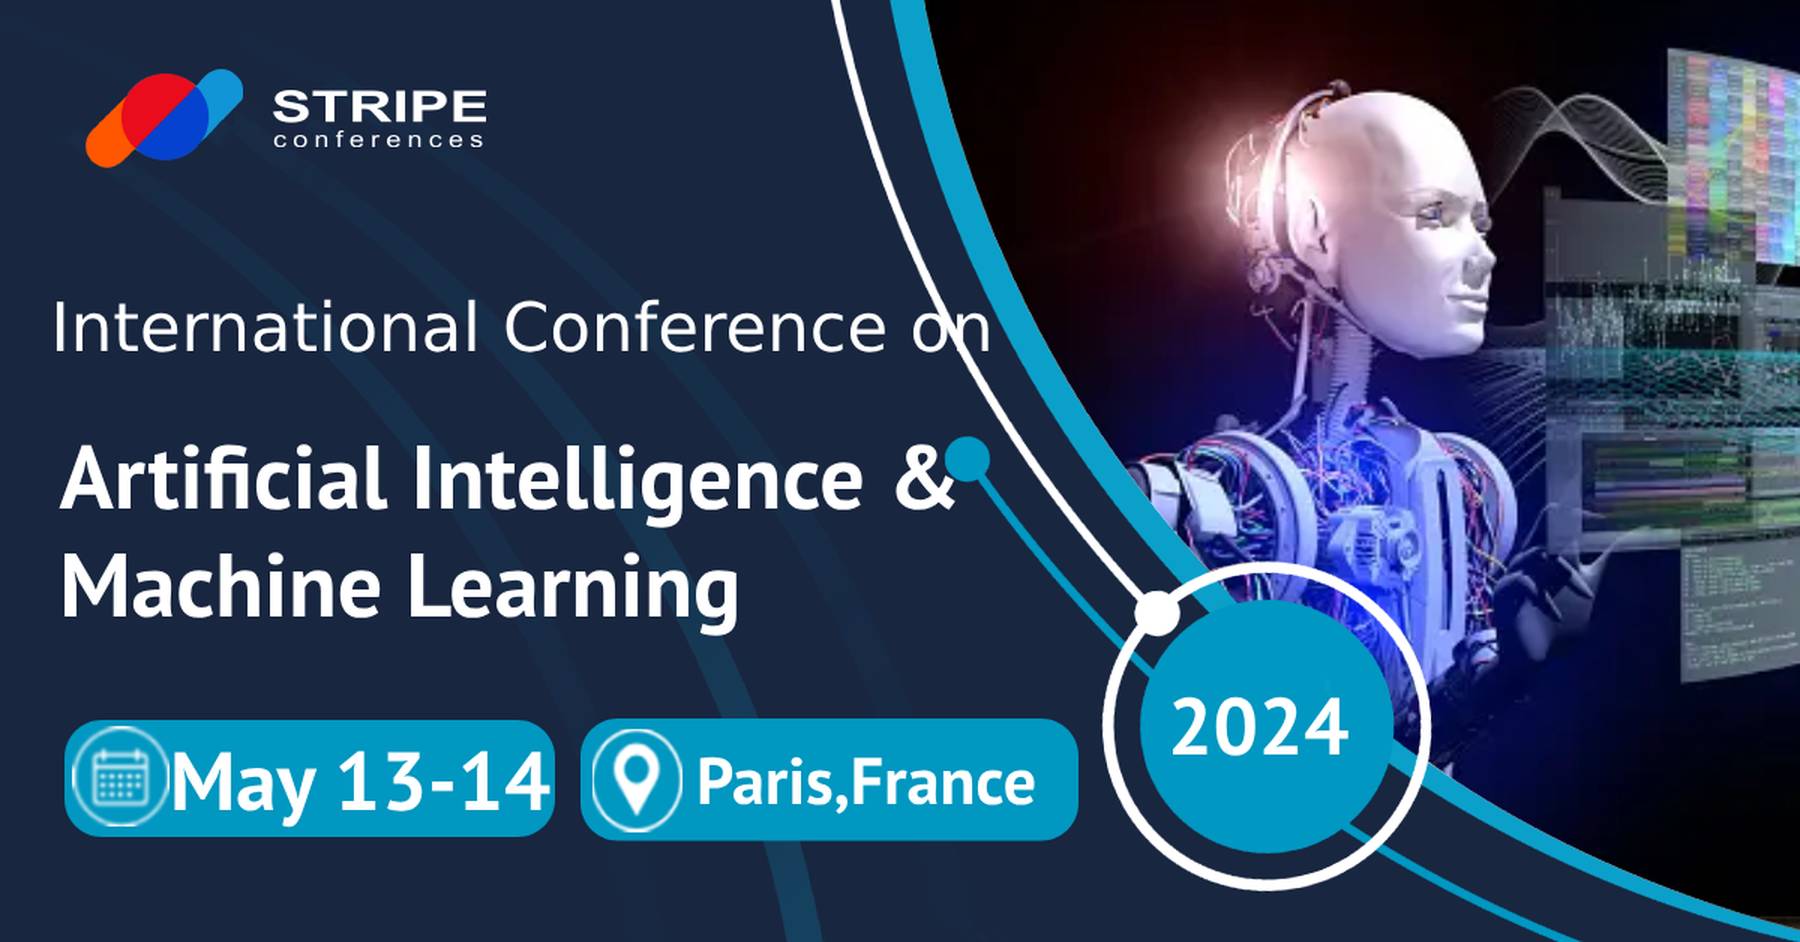 Artificial Intelligence Conferences - Machine Learning Event 2024